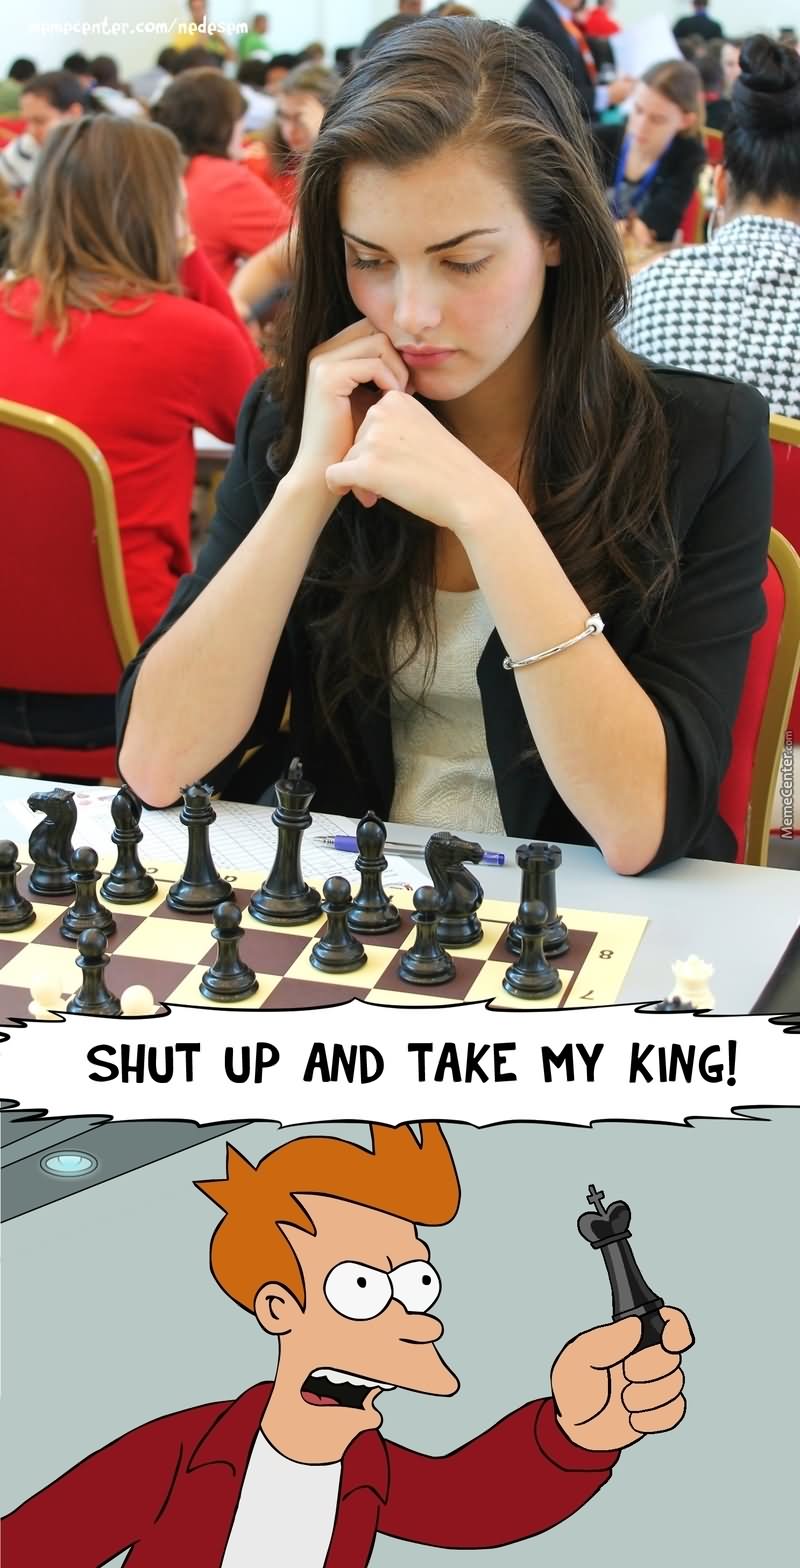 Shut Up And Take My King Funny Chess Meme Image